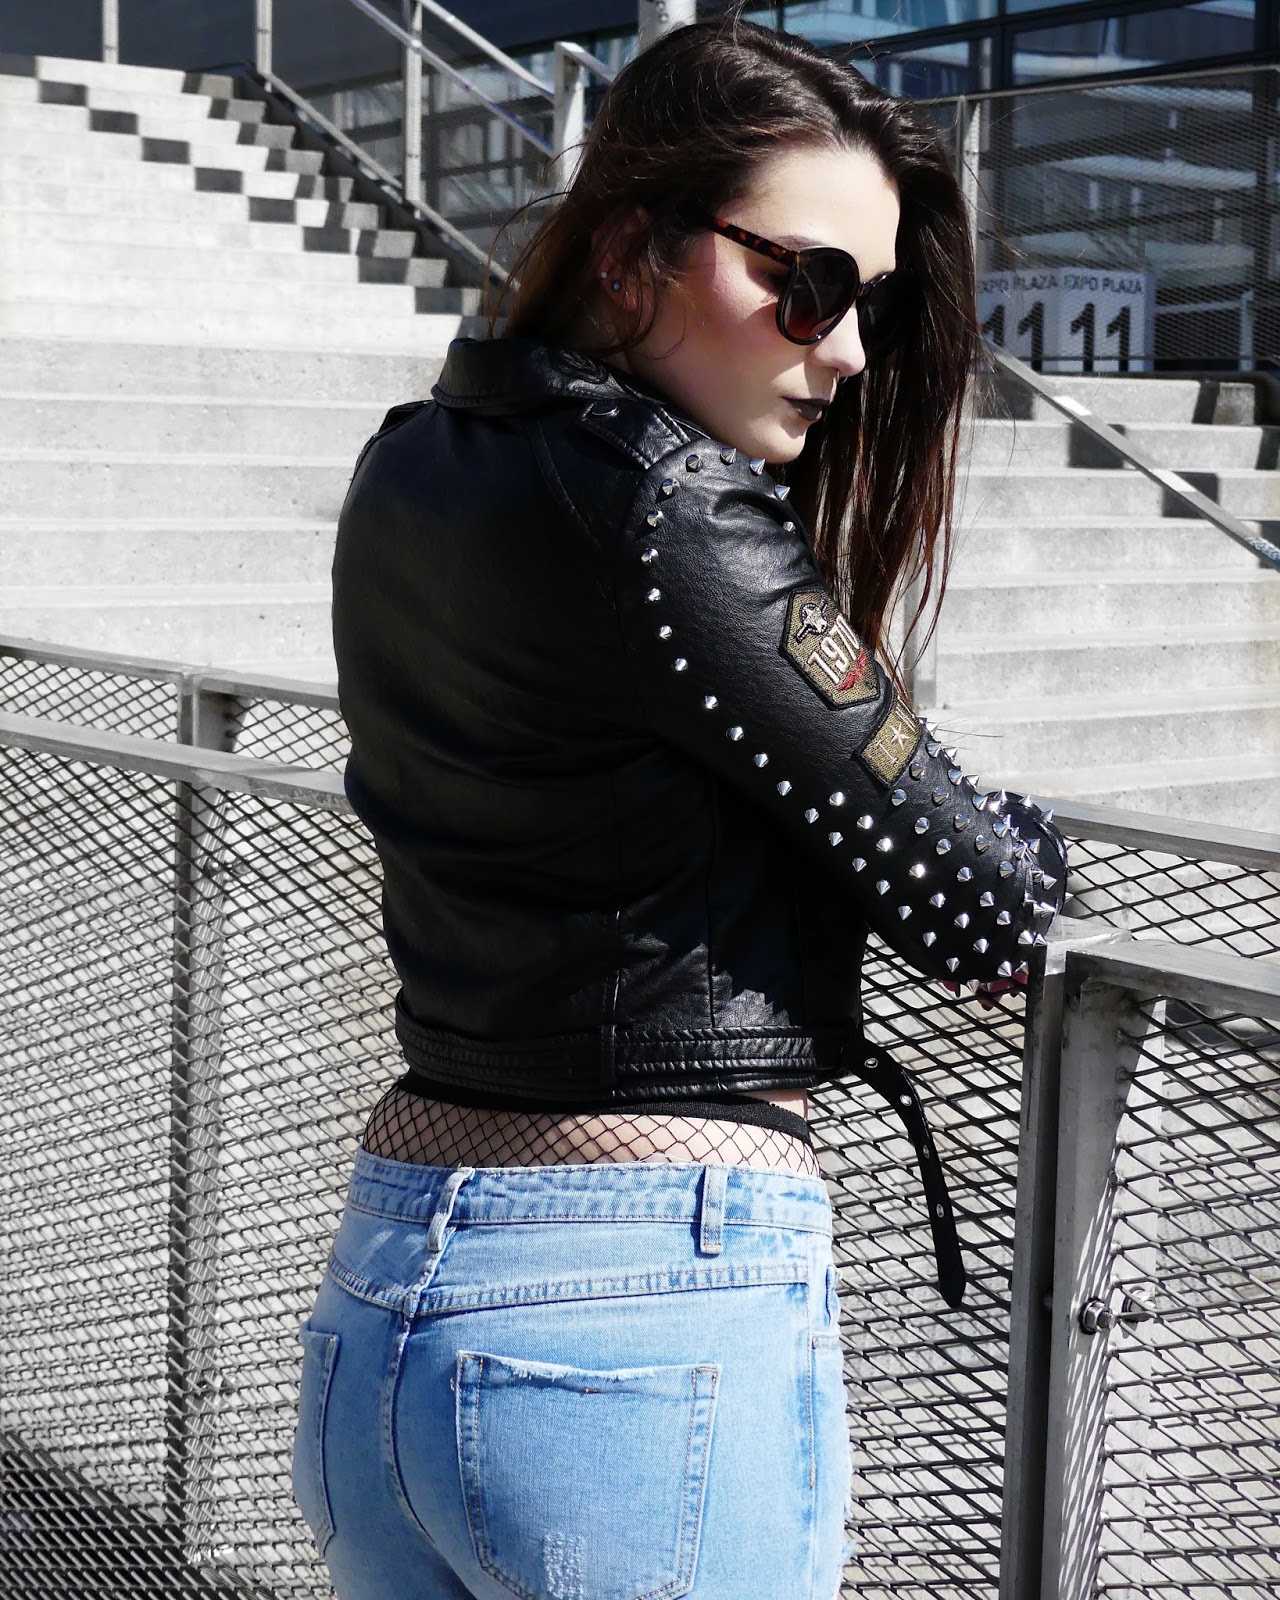 Get the Look - Boyfriend Jeans mit Cut-Outs